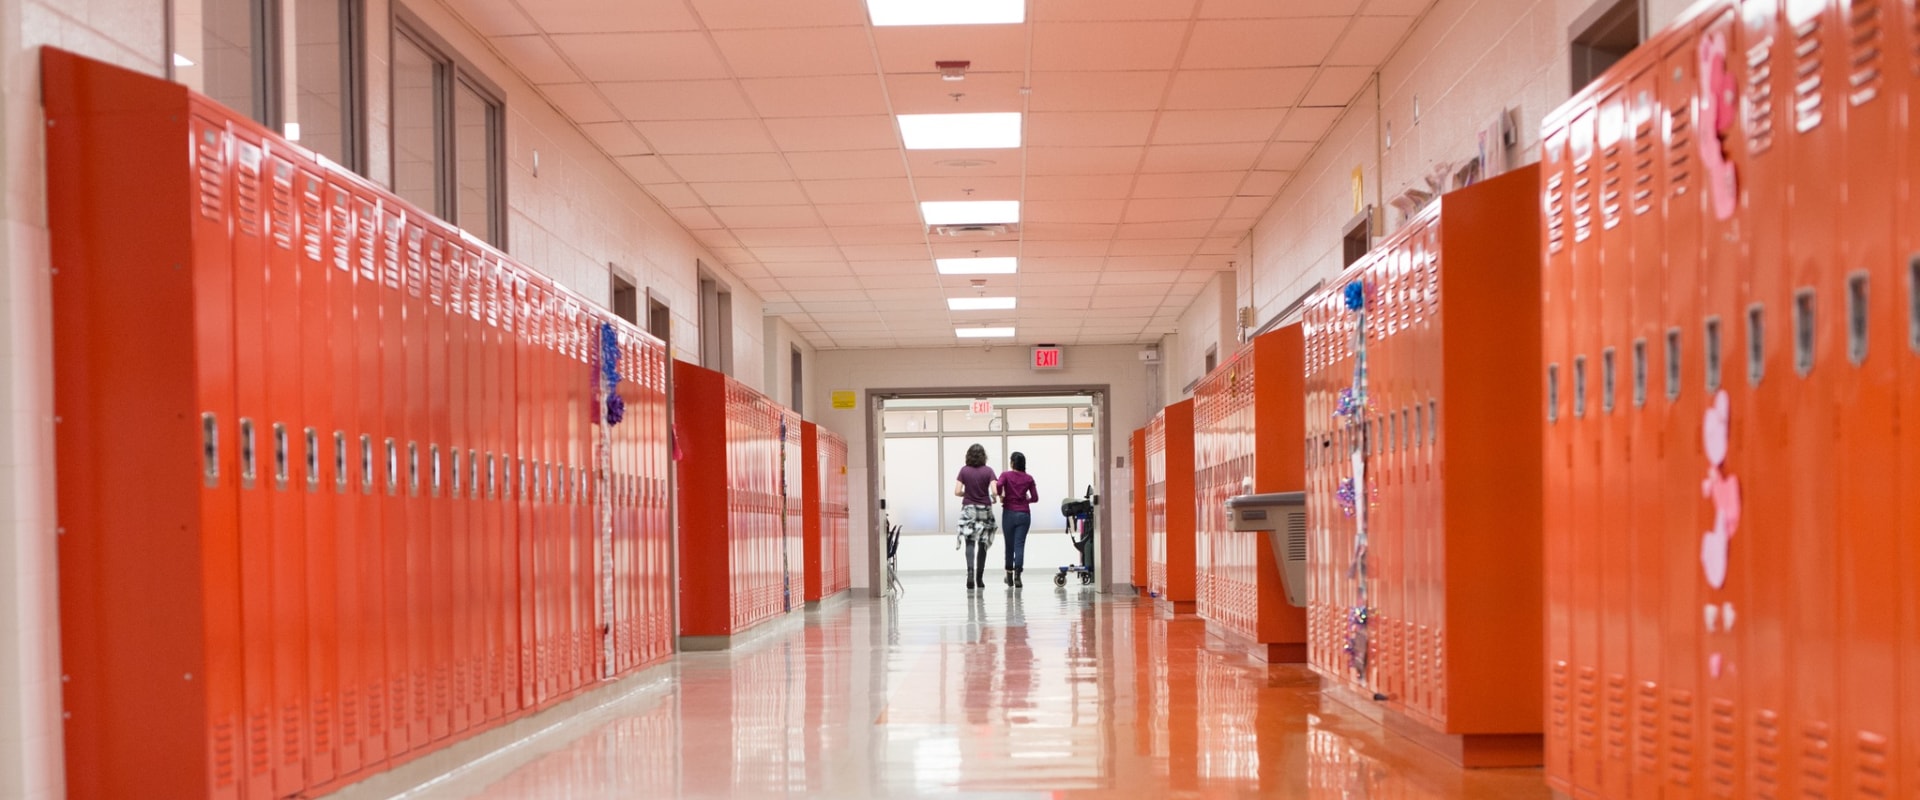 Ensuring School Safety in Dulles, Virginia: What Measures Are in Place?